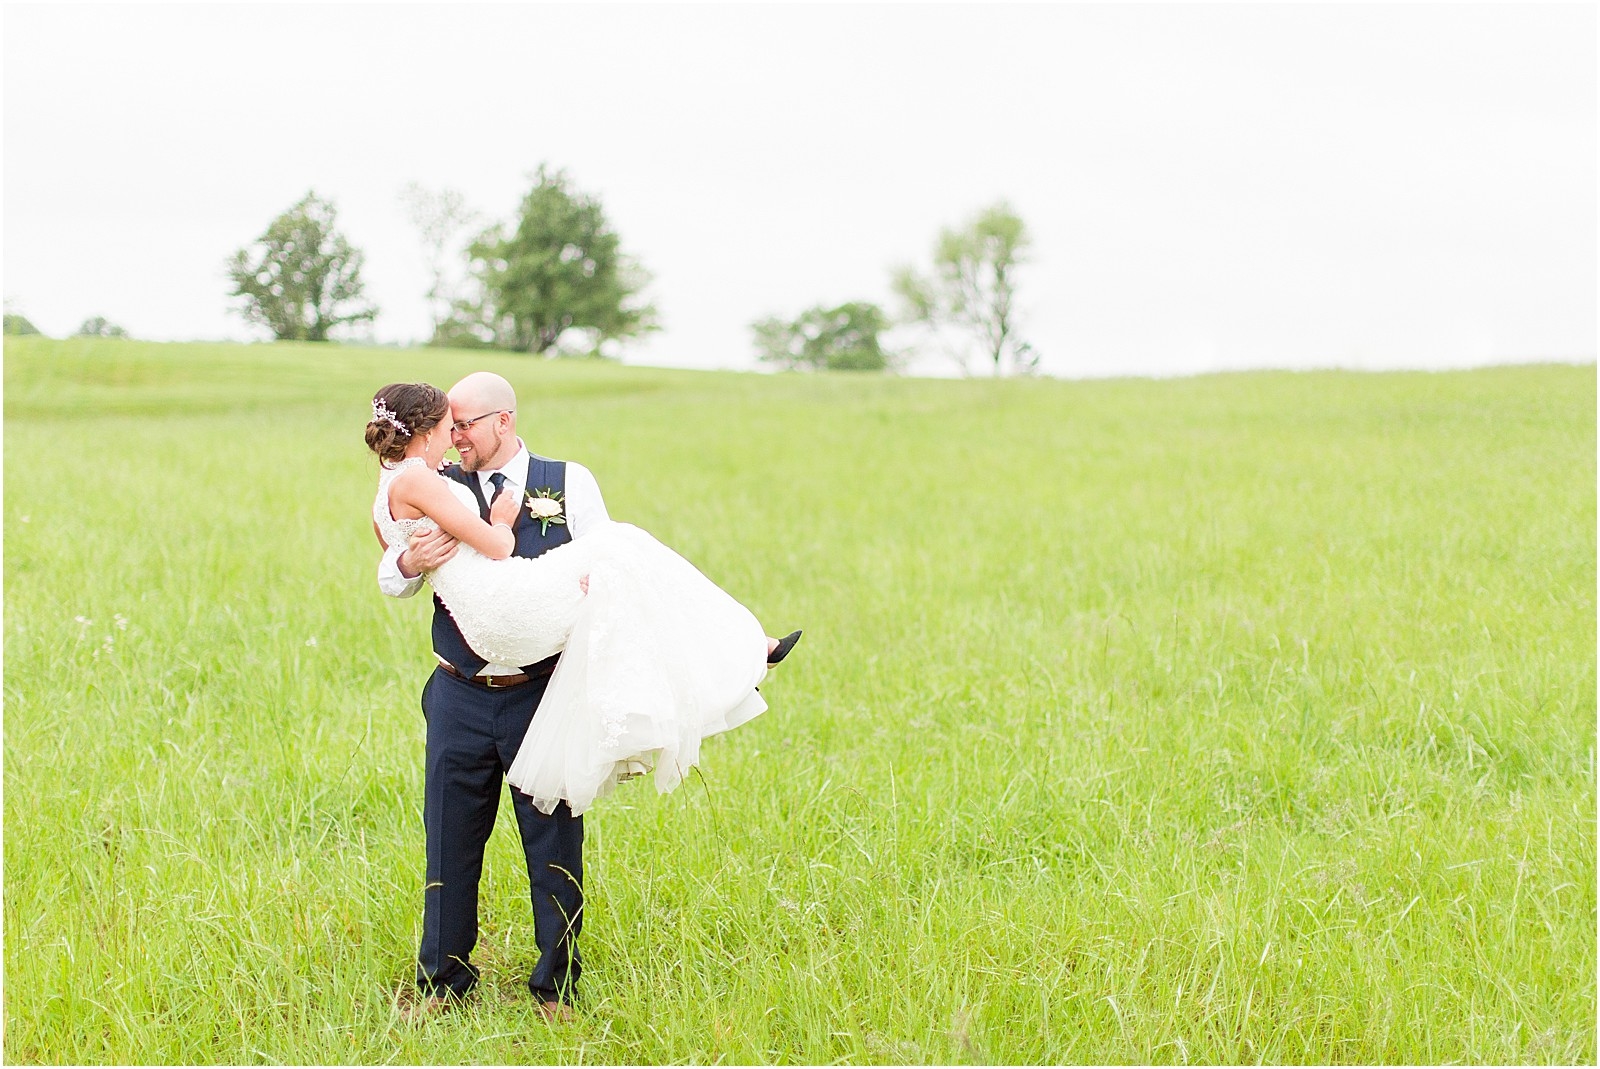 The Corner House Bed and Breakfast Wedding | Meagan and Michael130.jpg